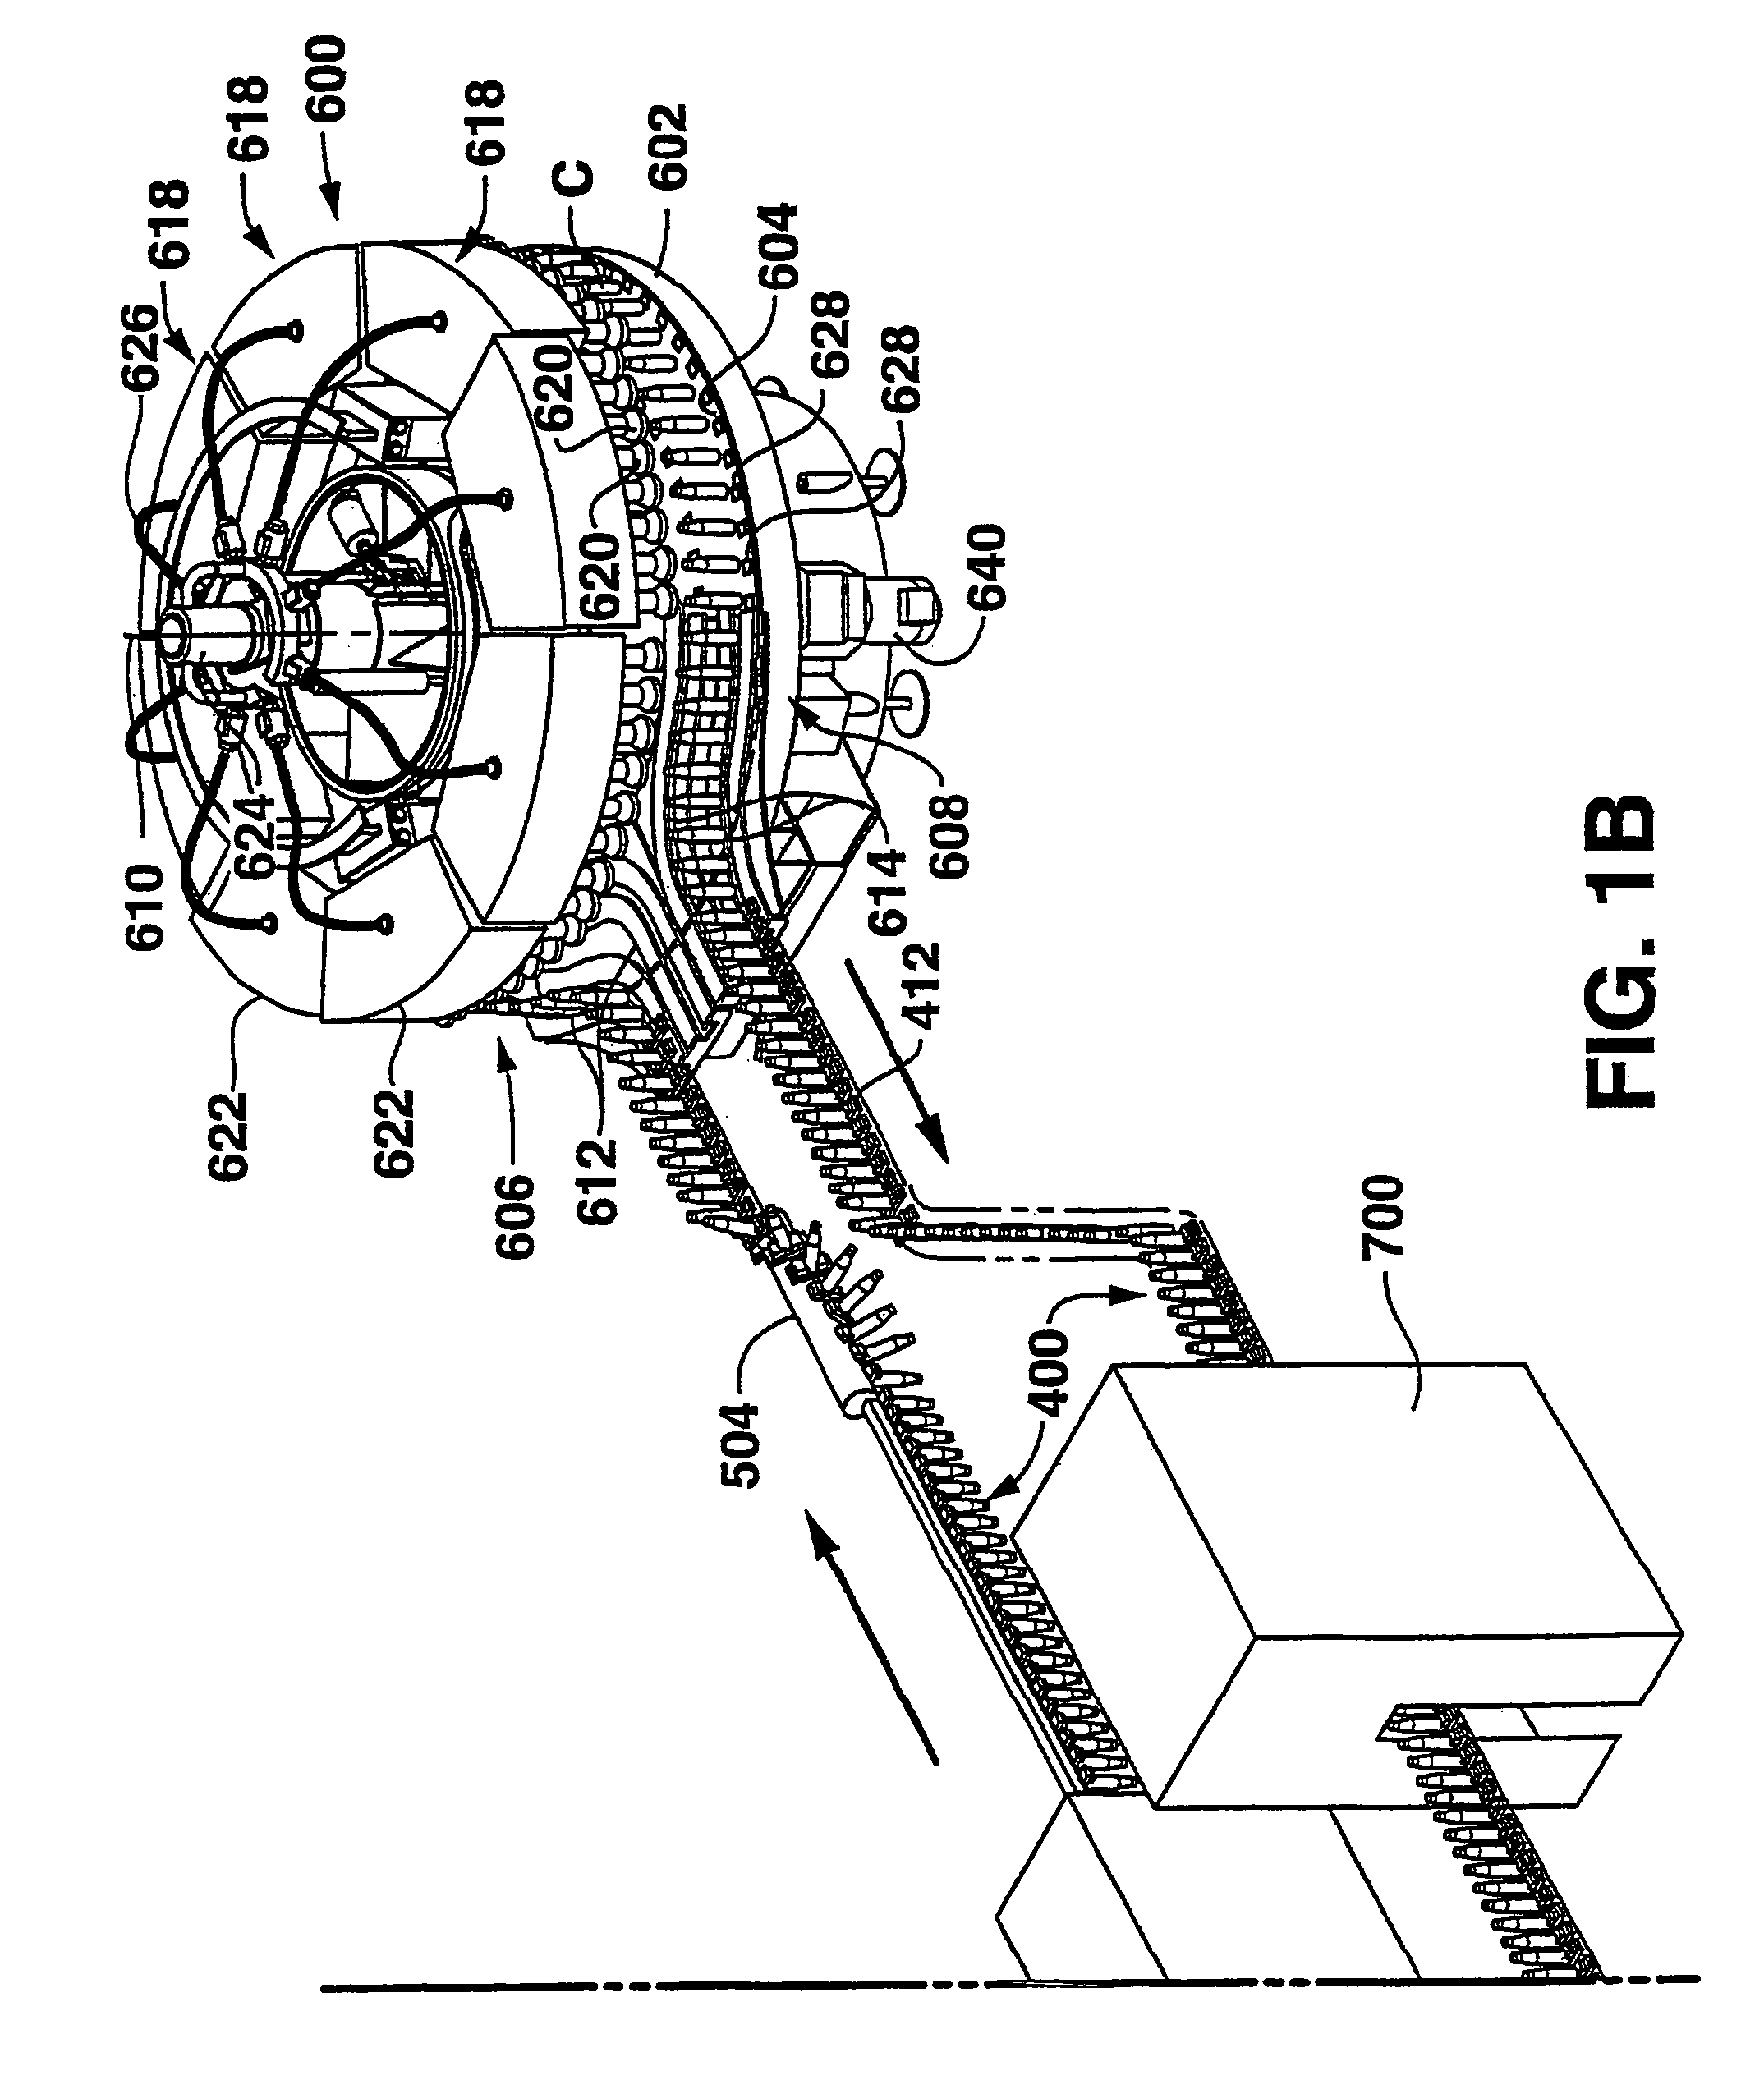 System for securely conveying articles and related components